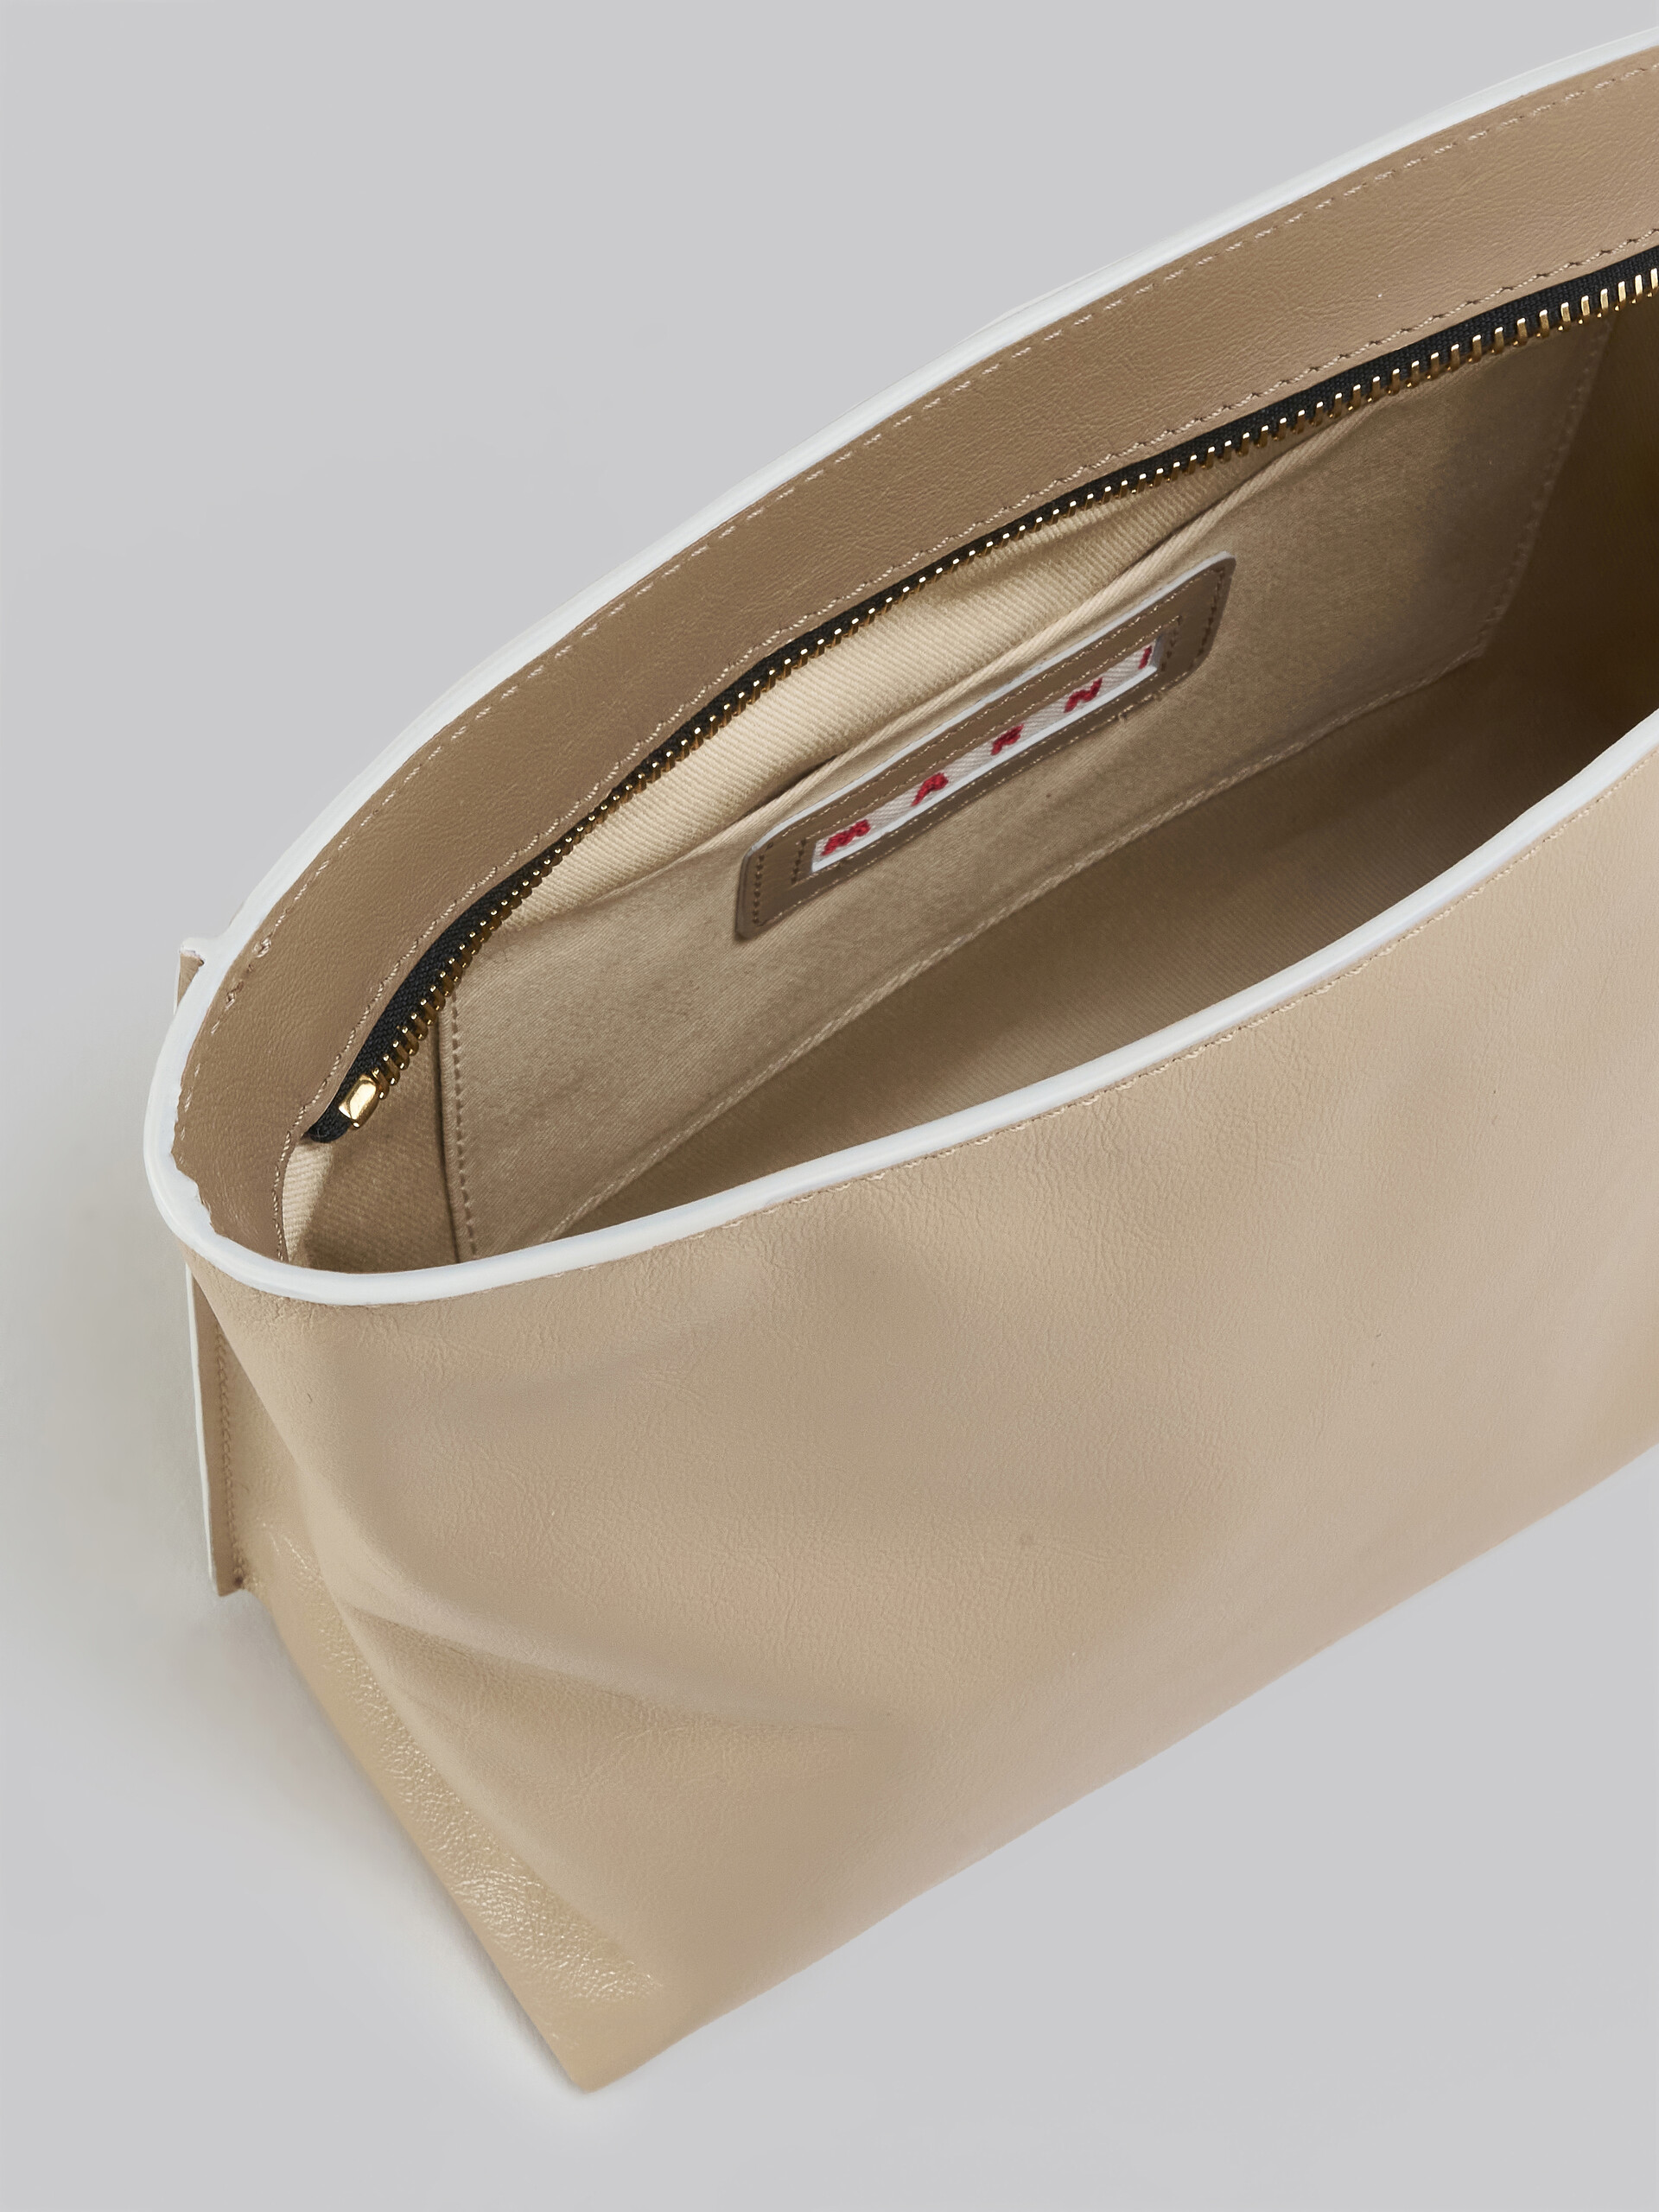 Museo Soft Clutch in grey-green beige and brown leather - Pochette - Image 4